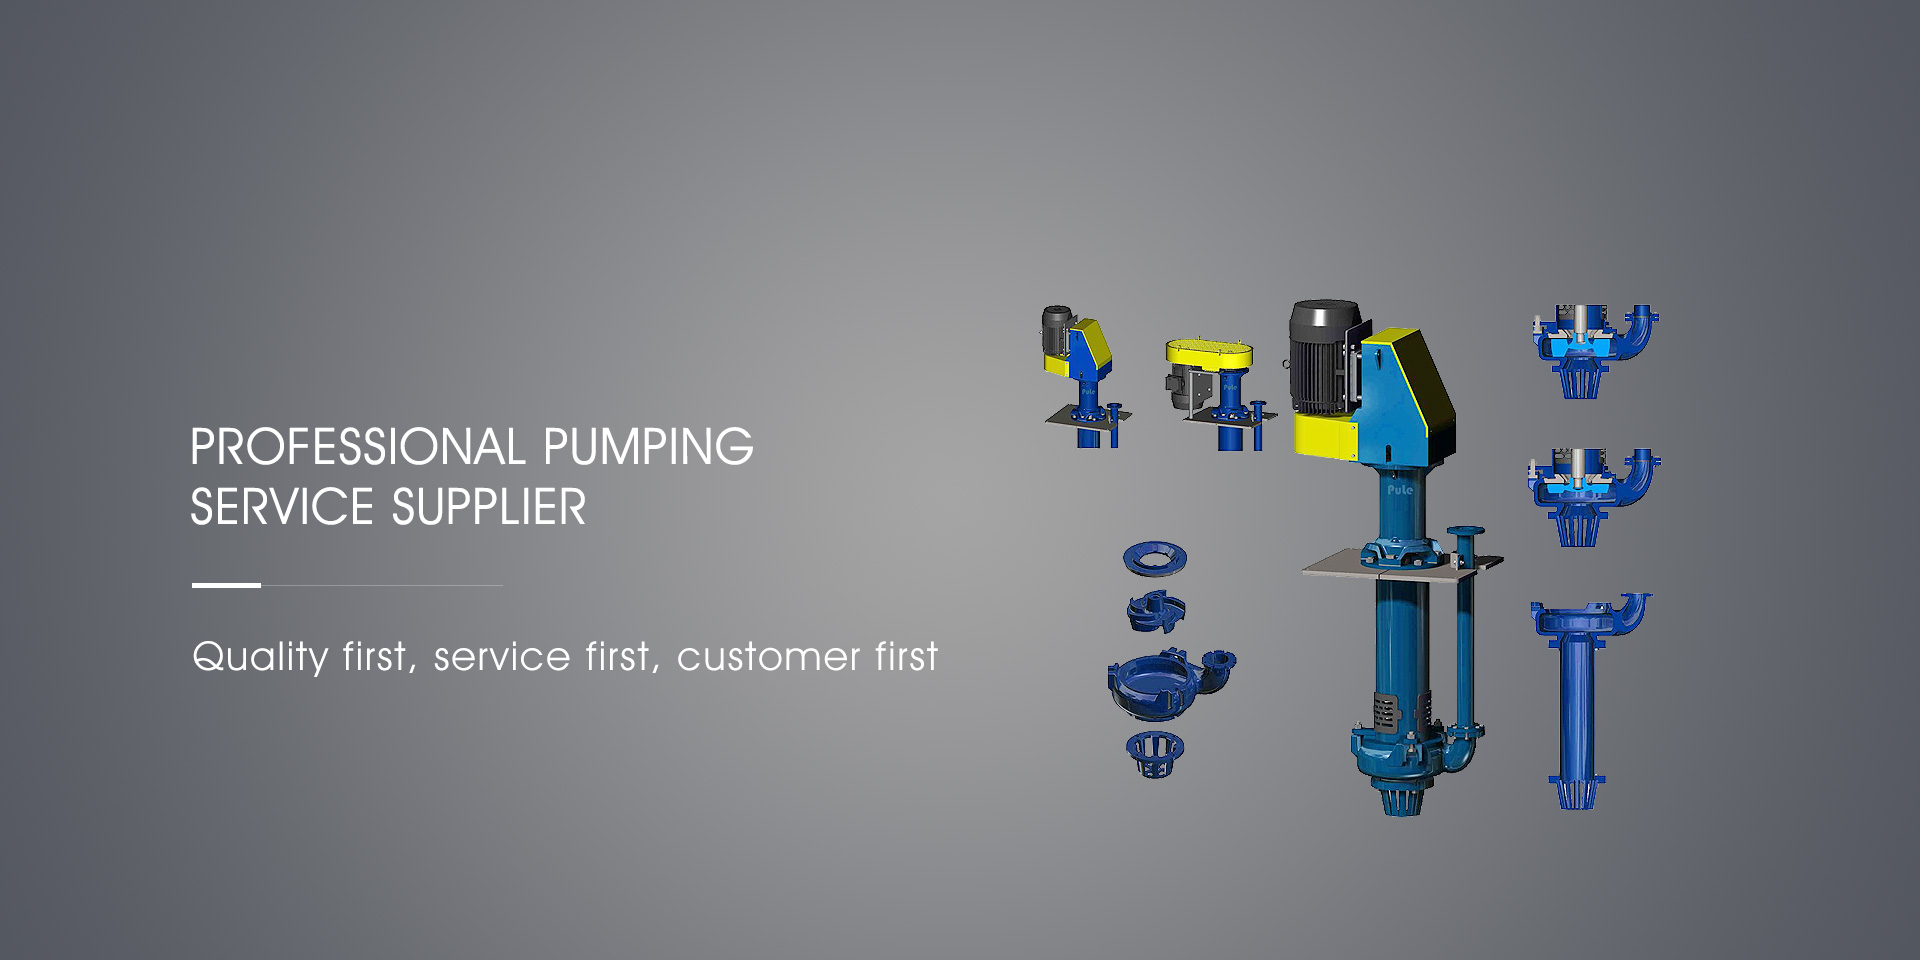 How to replace the filter element of Vertical slurry pump